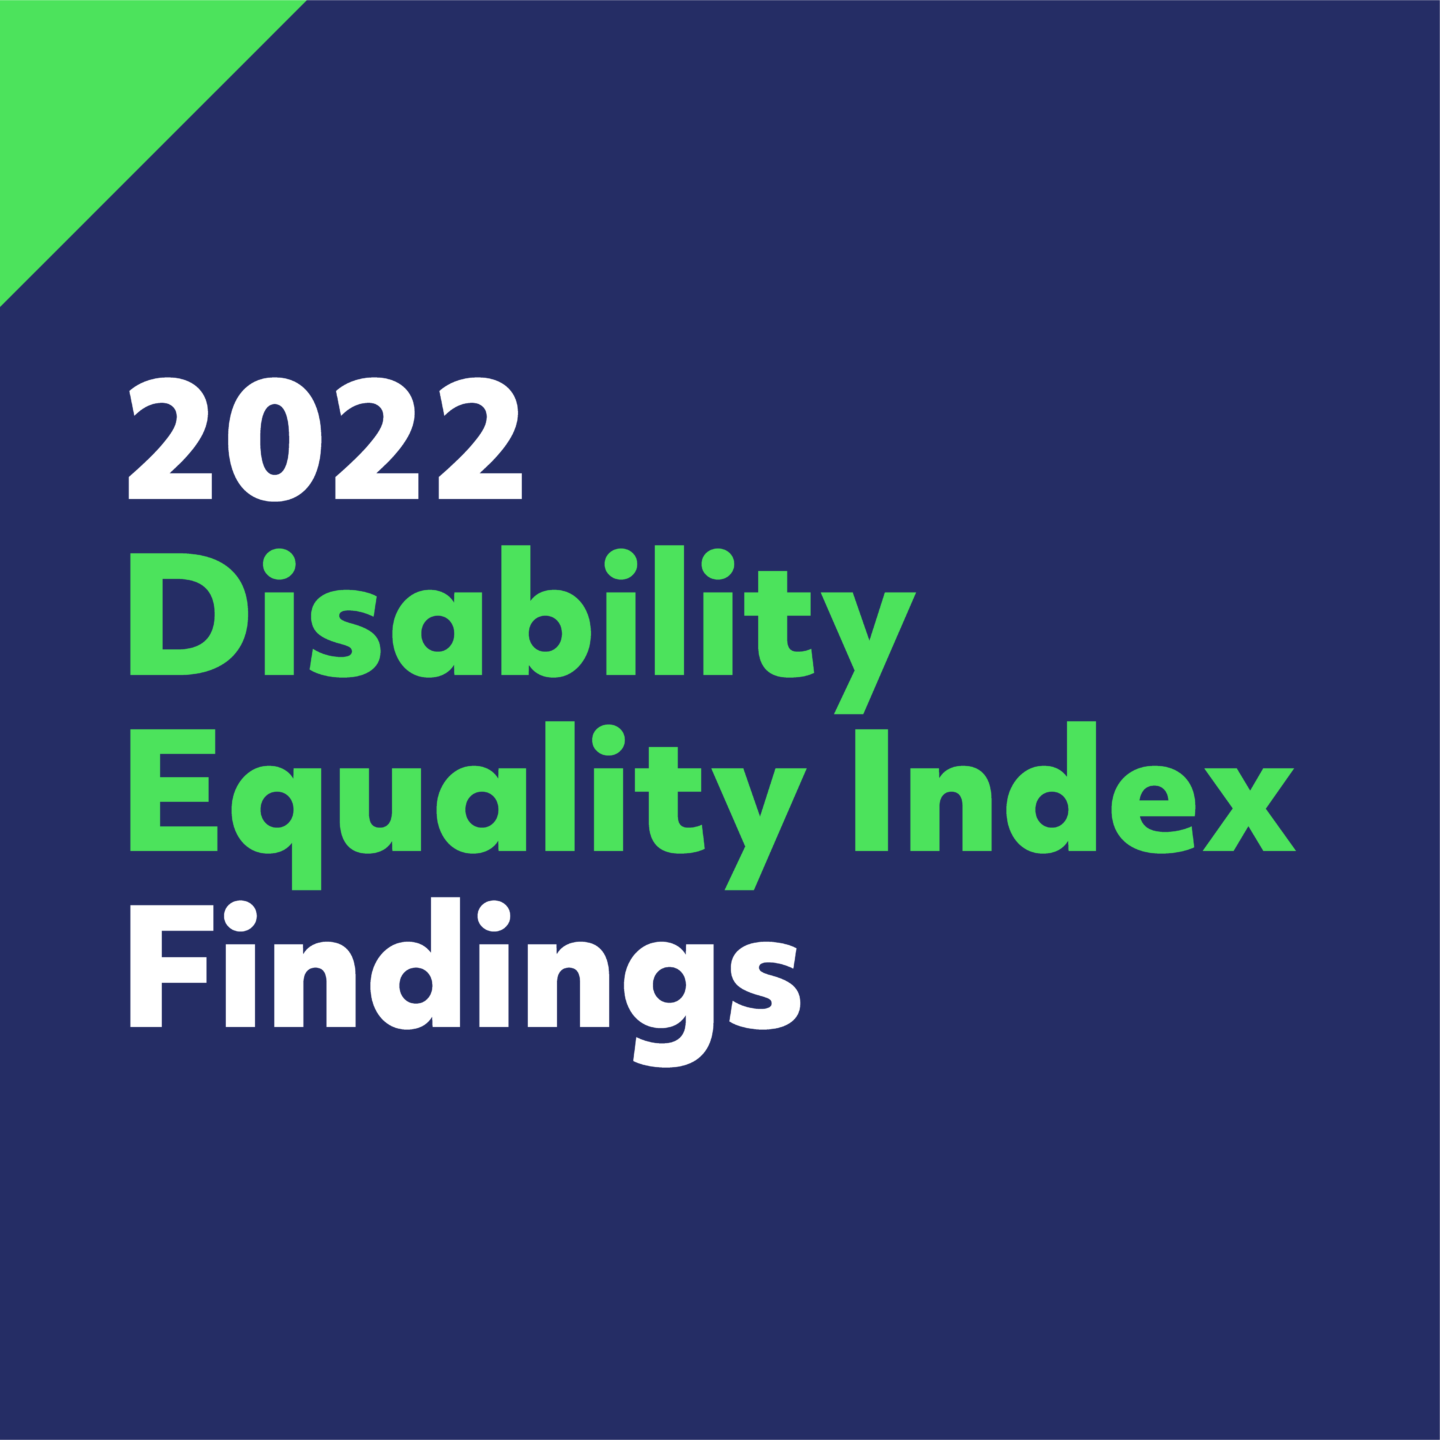 2022 Disability Equality Index Findings